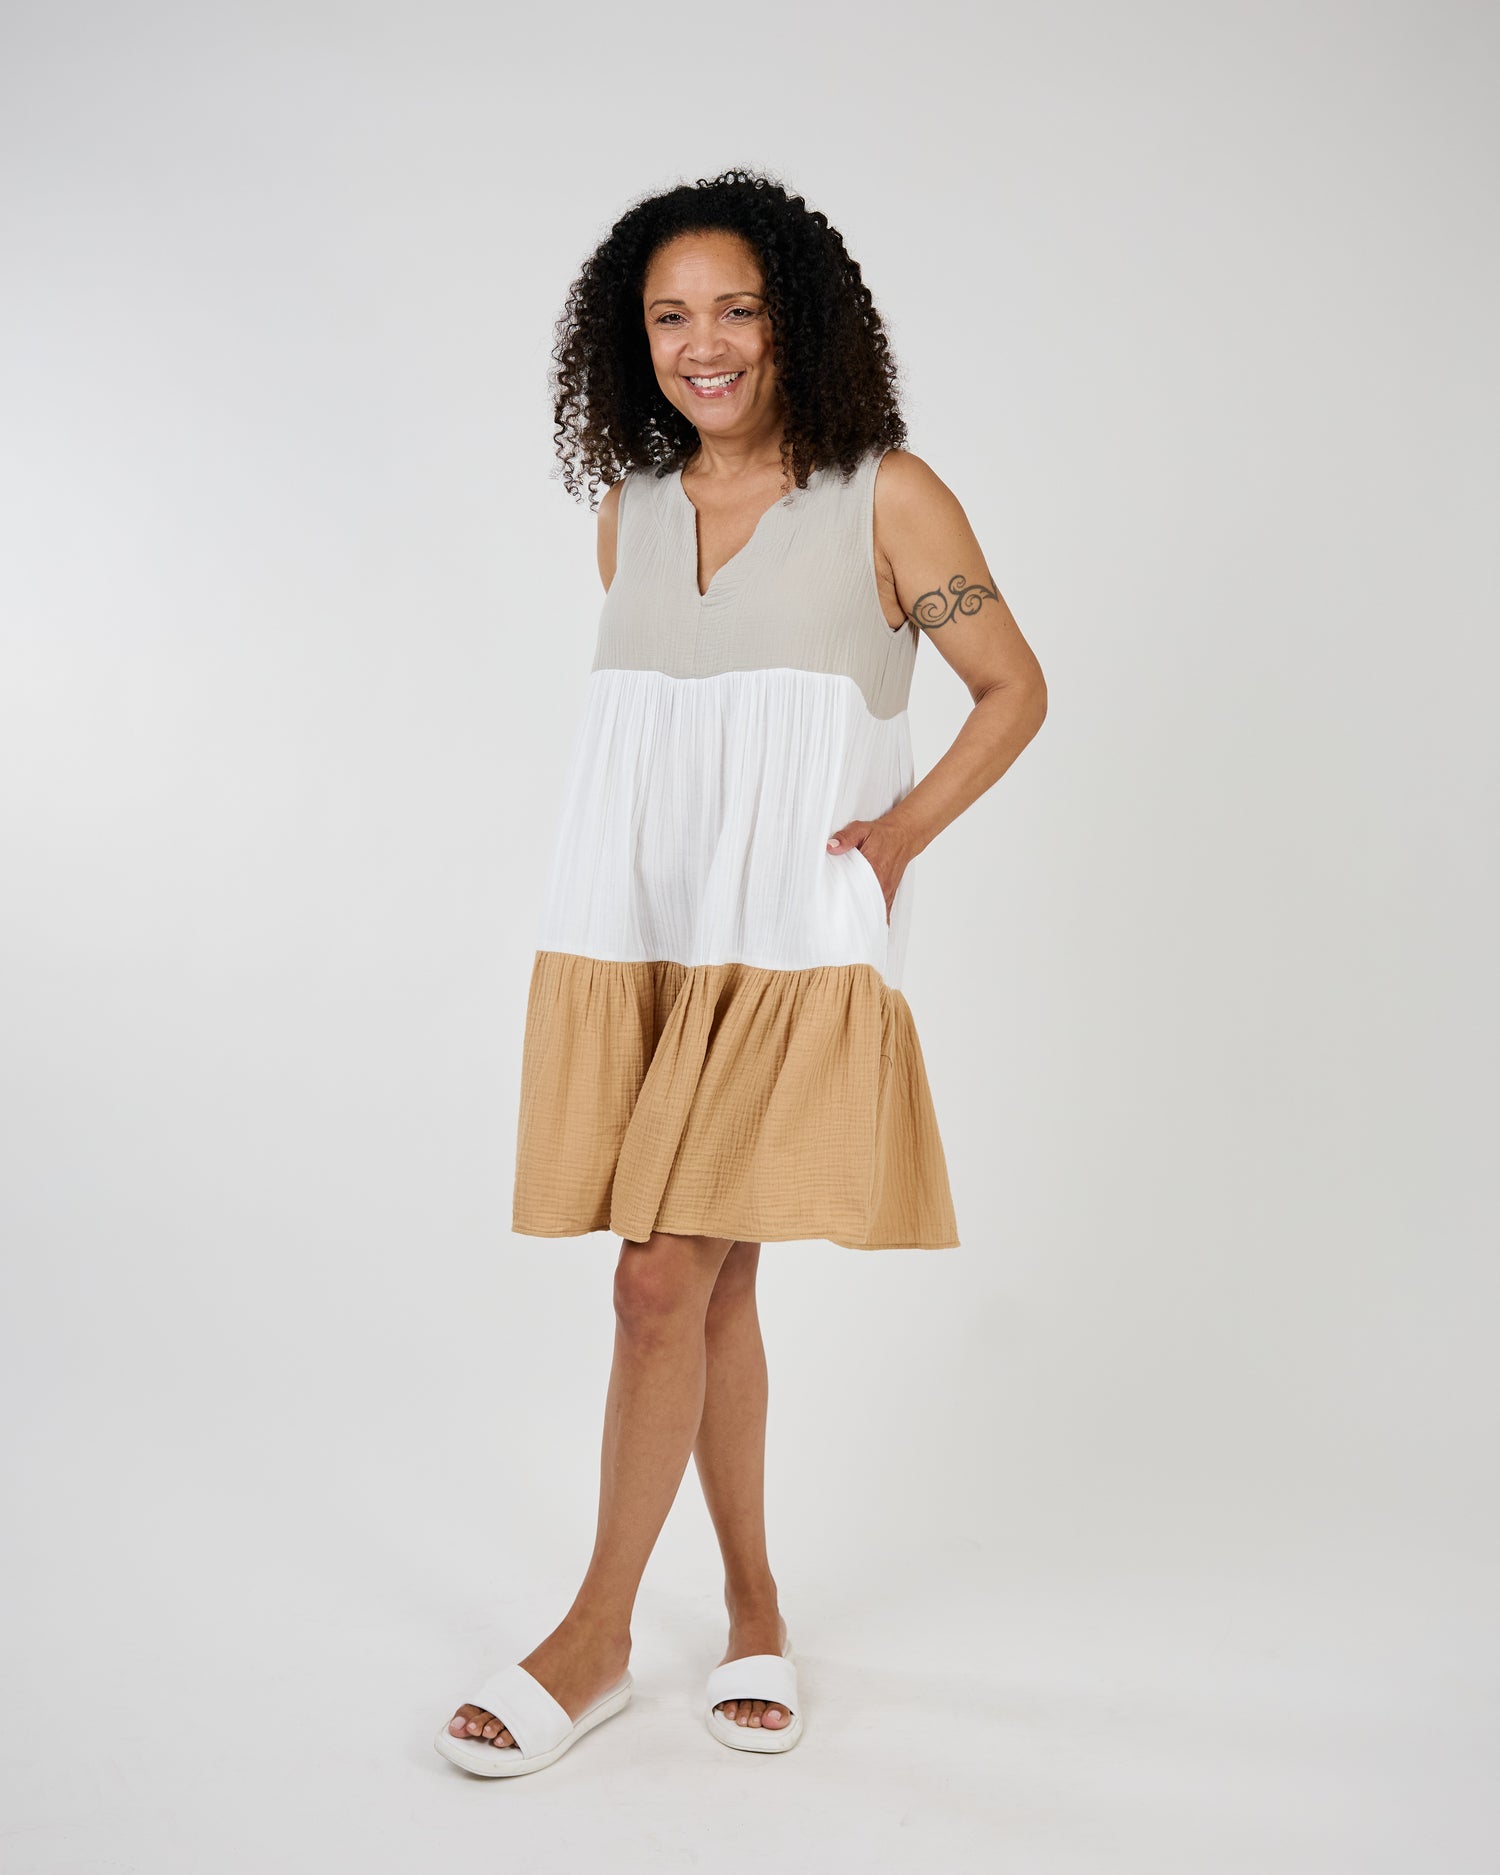 Woman smiling in a sleeveless, Shannon Passero Sandmix Lyric Mid Length Dress and white sandals against a plain background.